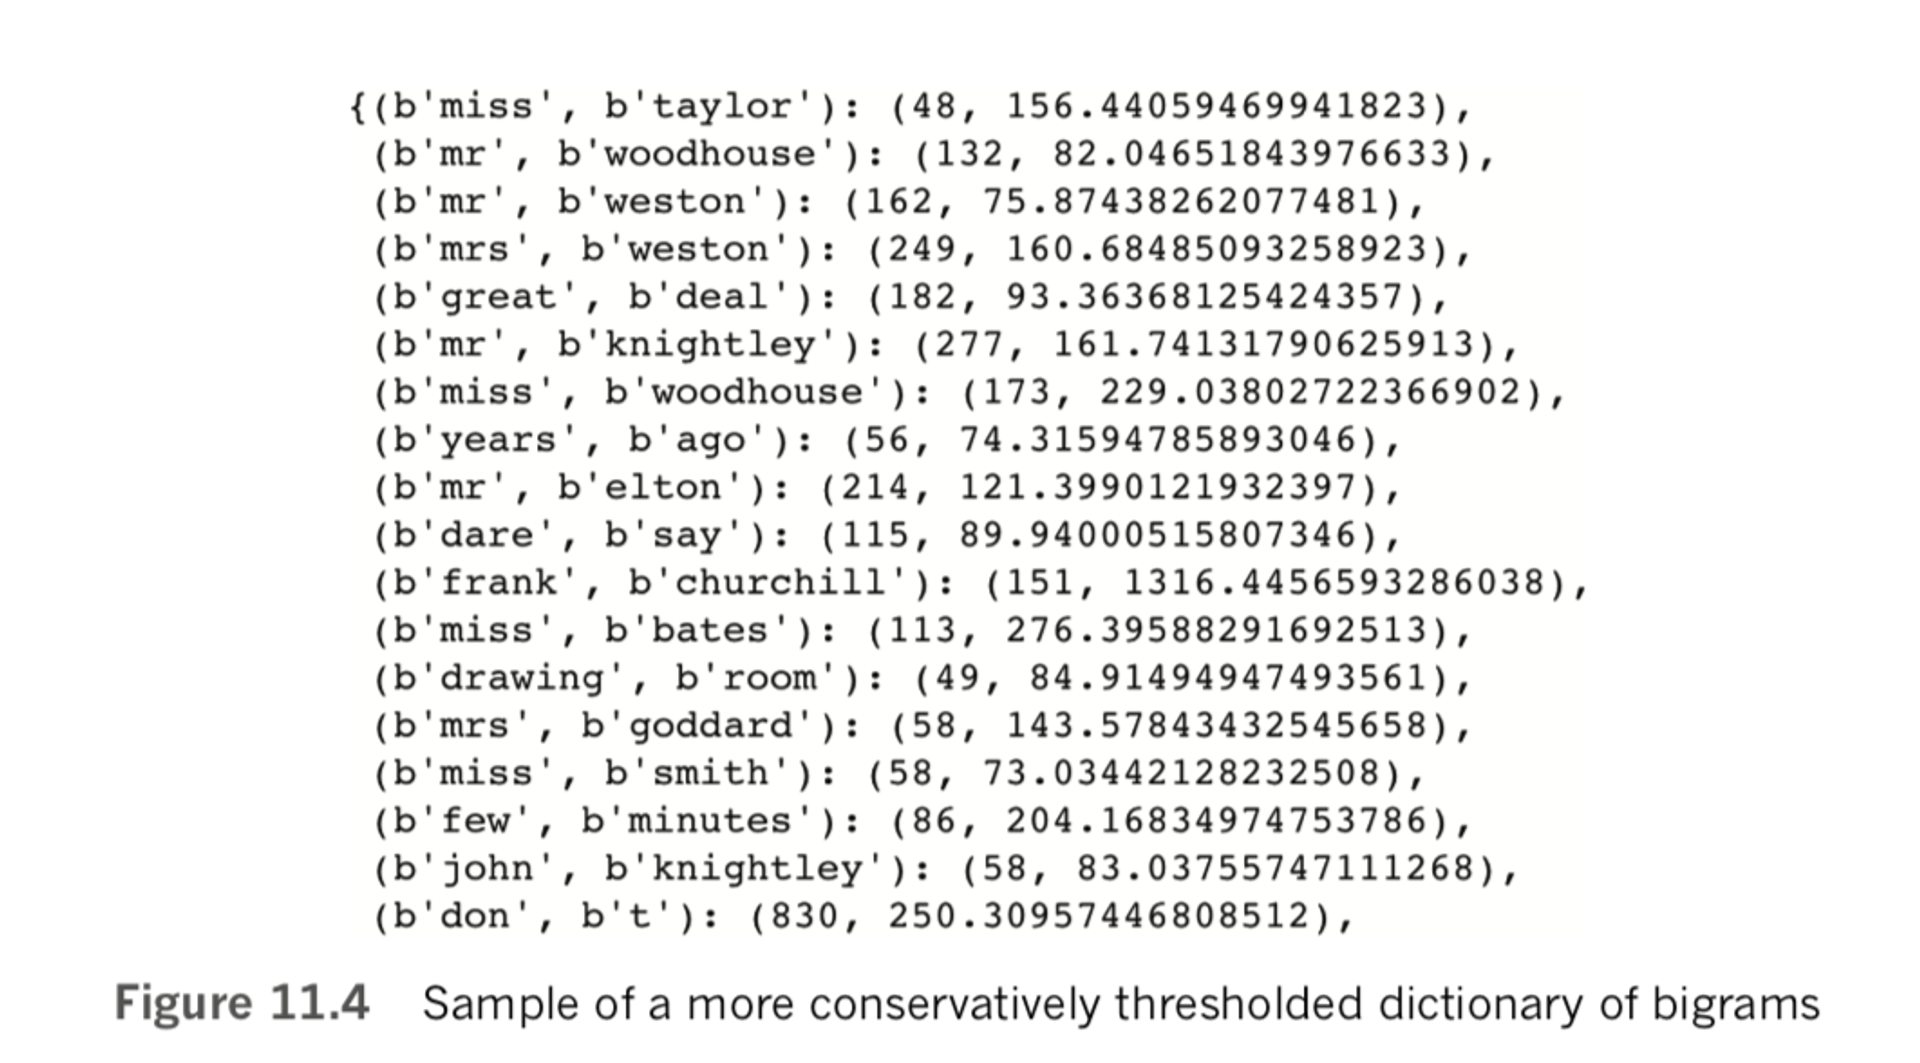 Sample of a thresholded dictionary of bigrams